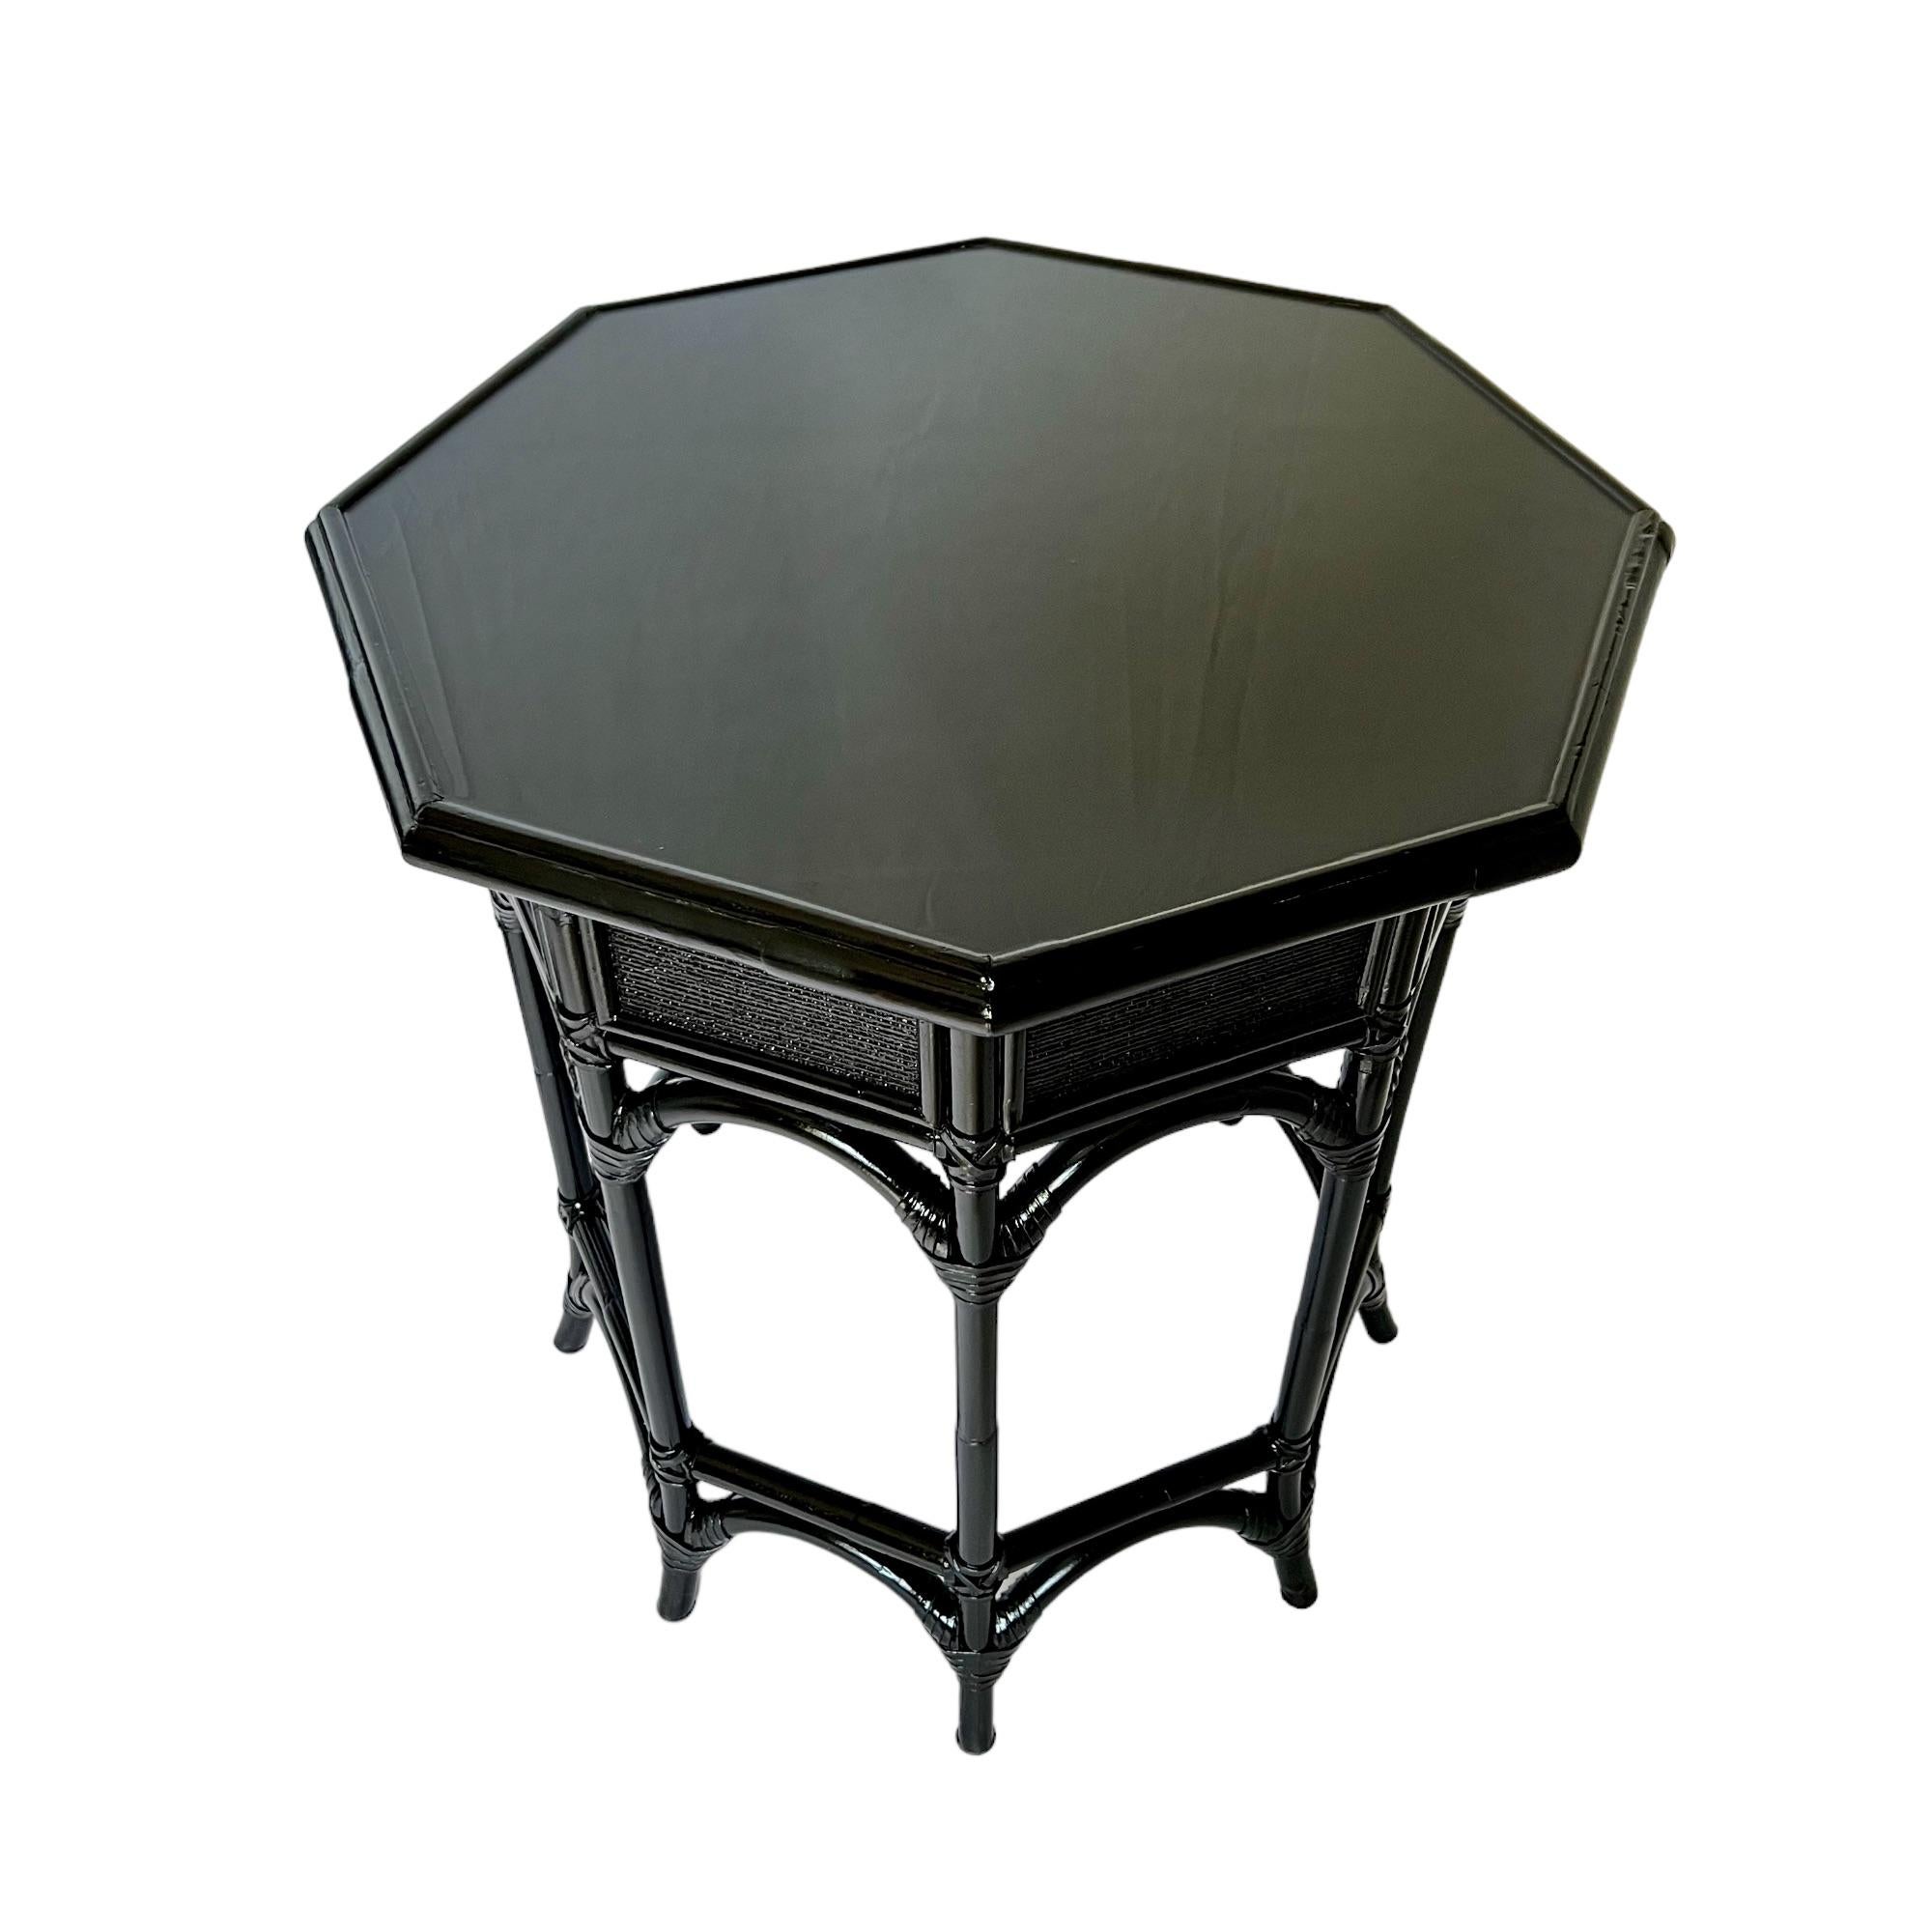 Vintage Refinished Black Rattan Resin Top Octagon Side Tables, a Pair In Good Condition For Sale In Harlingen, TX